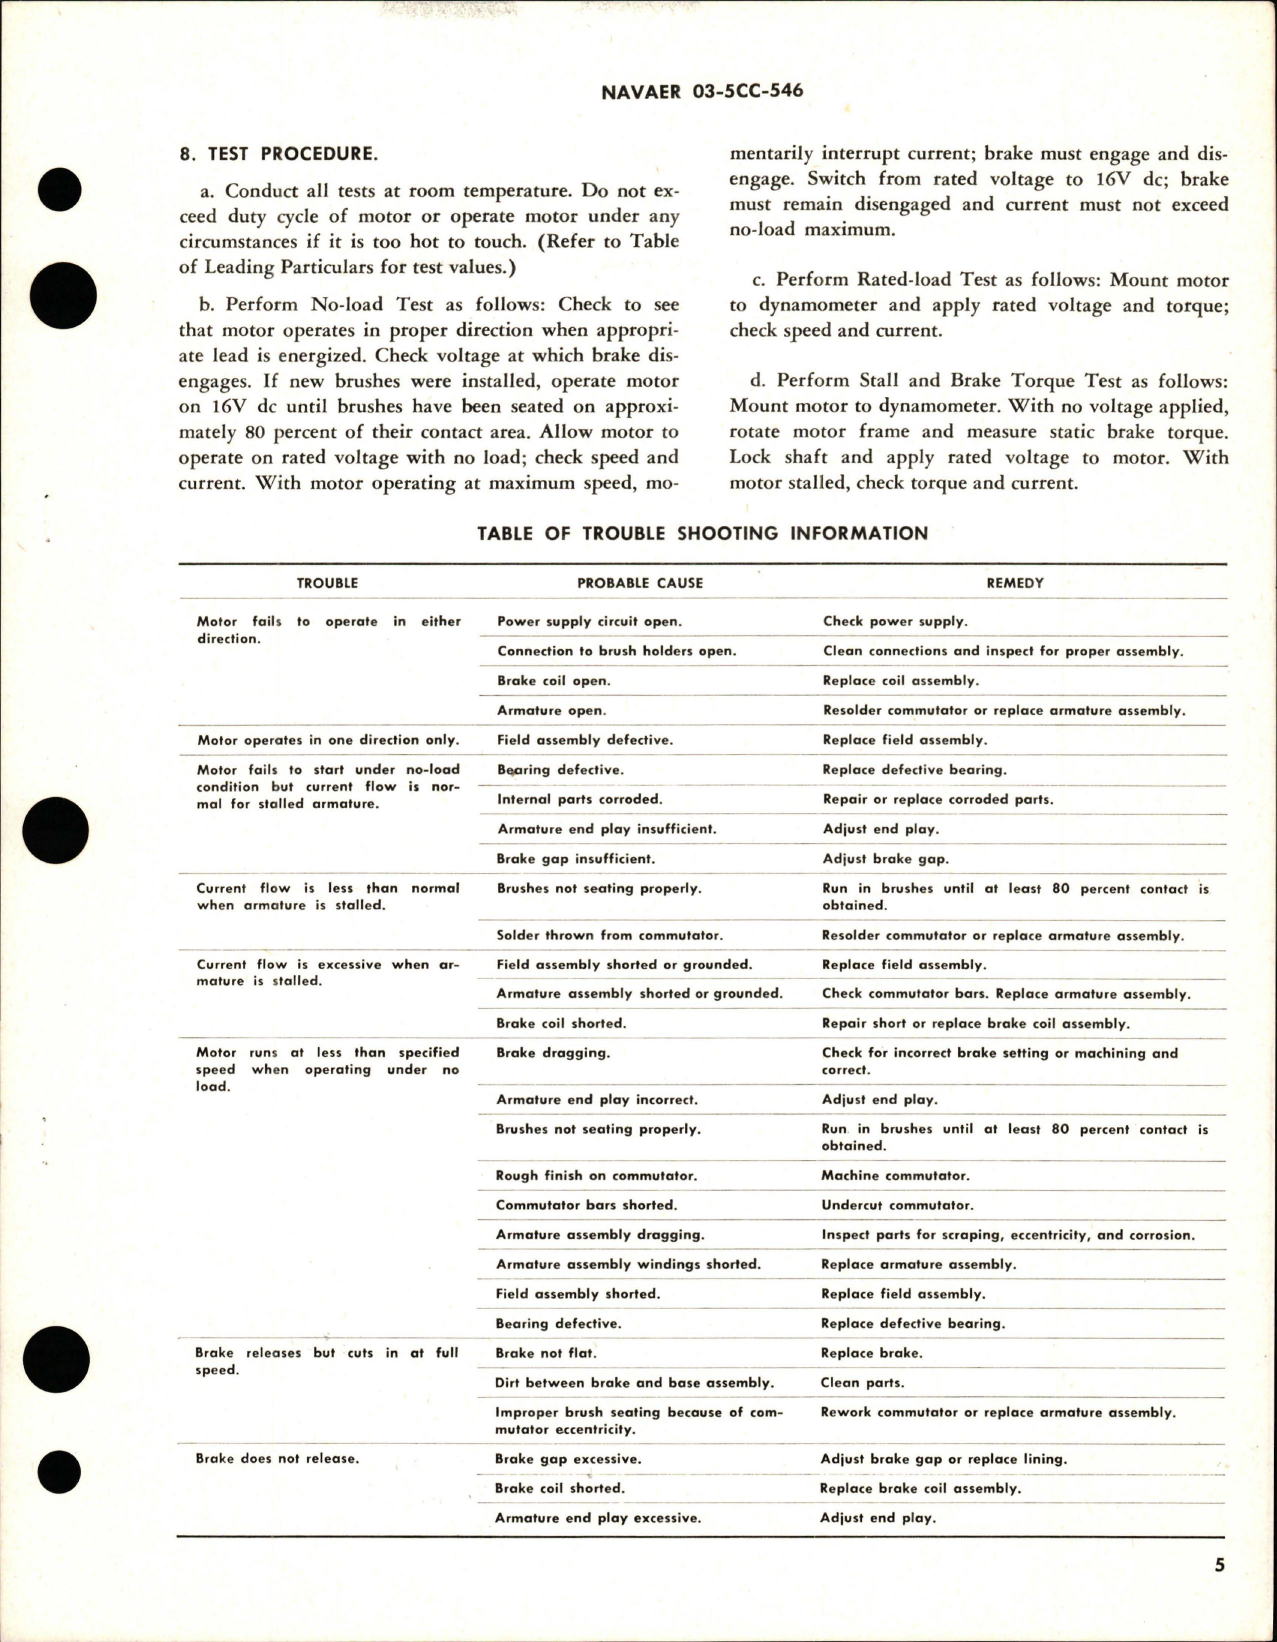 Sample page 5 from AirCorps Library document: Overhaul Instructions with Parts Breakdown for Direct-Current Motor - Part 26900-2